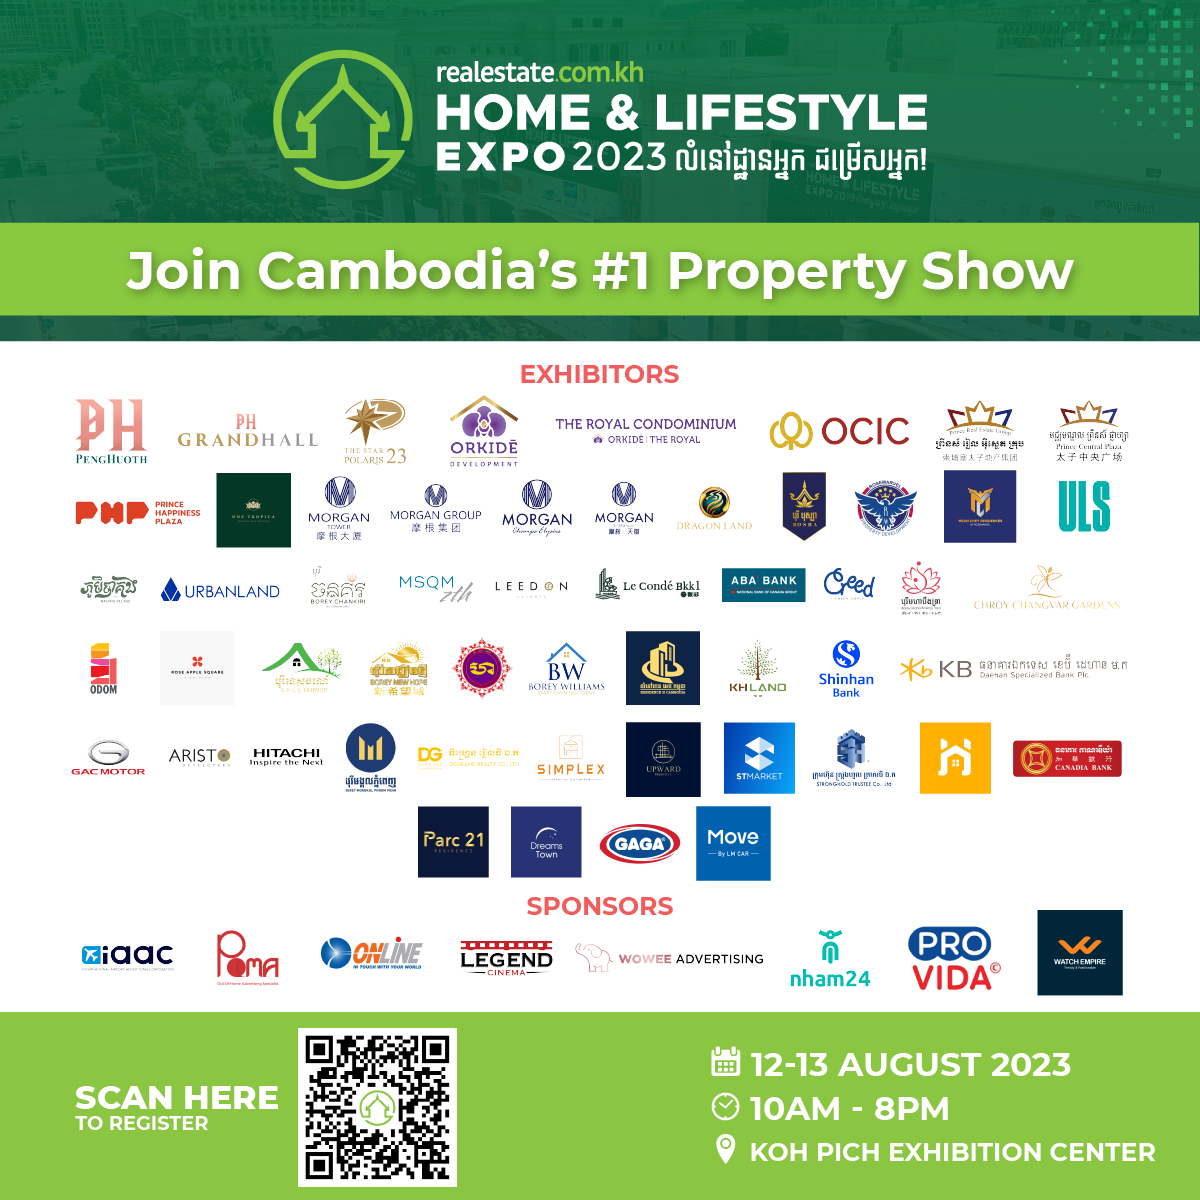 The Home & Lifestyle Expo 2023